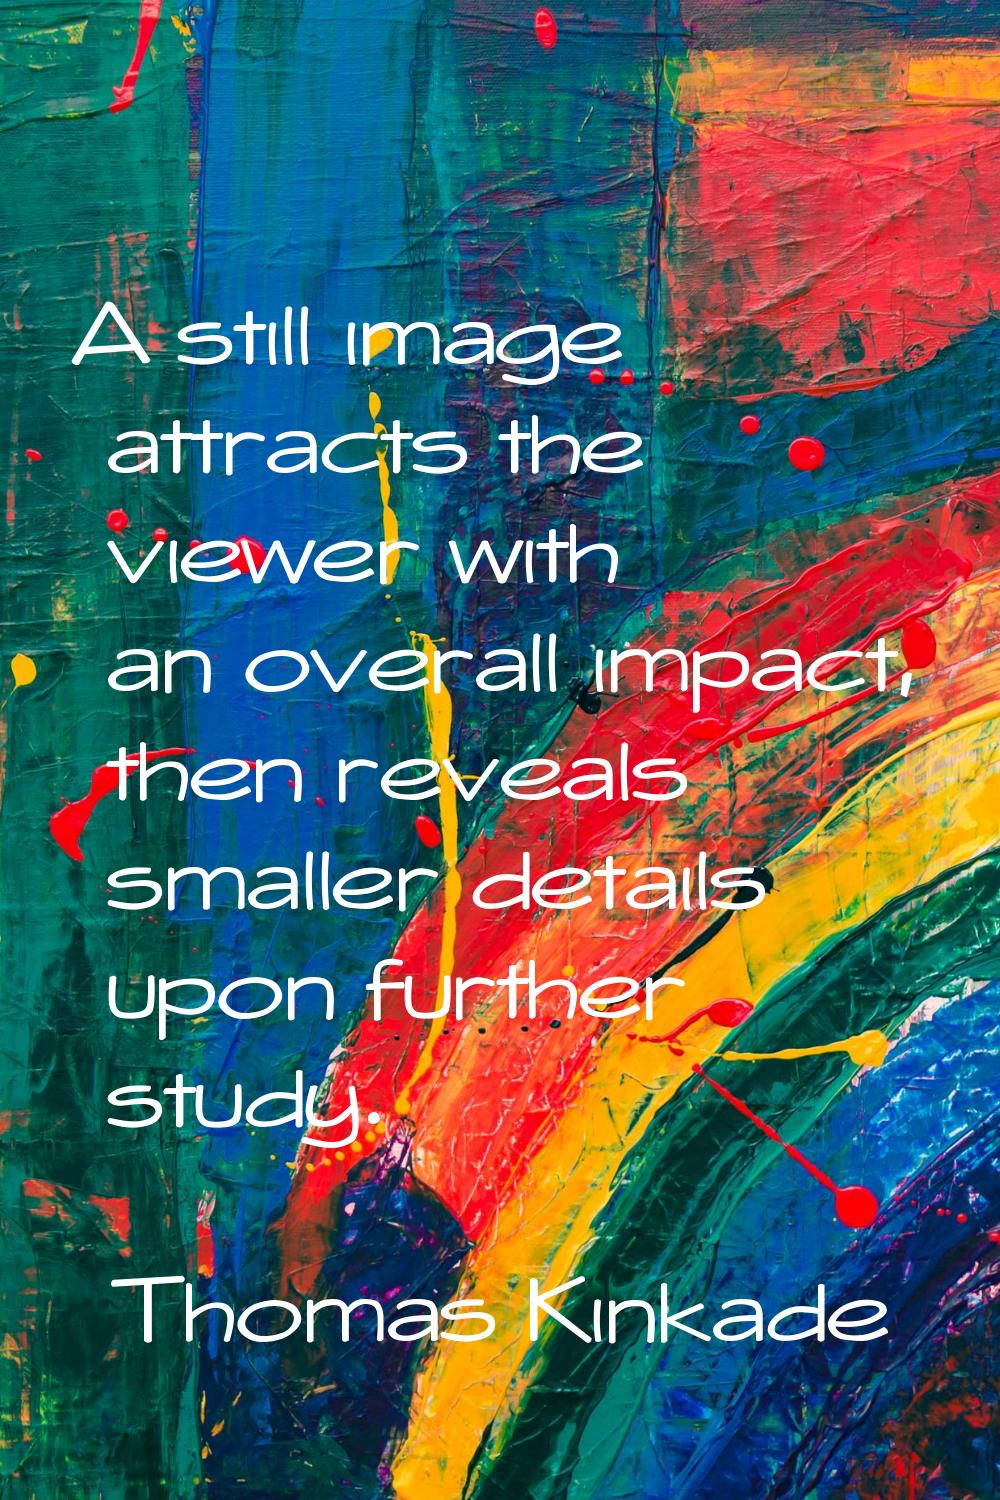 A still image attracts the viewer with an overall impact, then reveals smaller details upon further